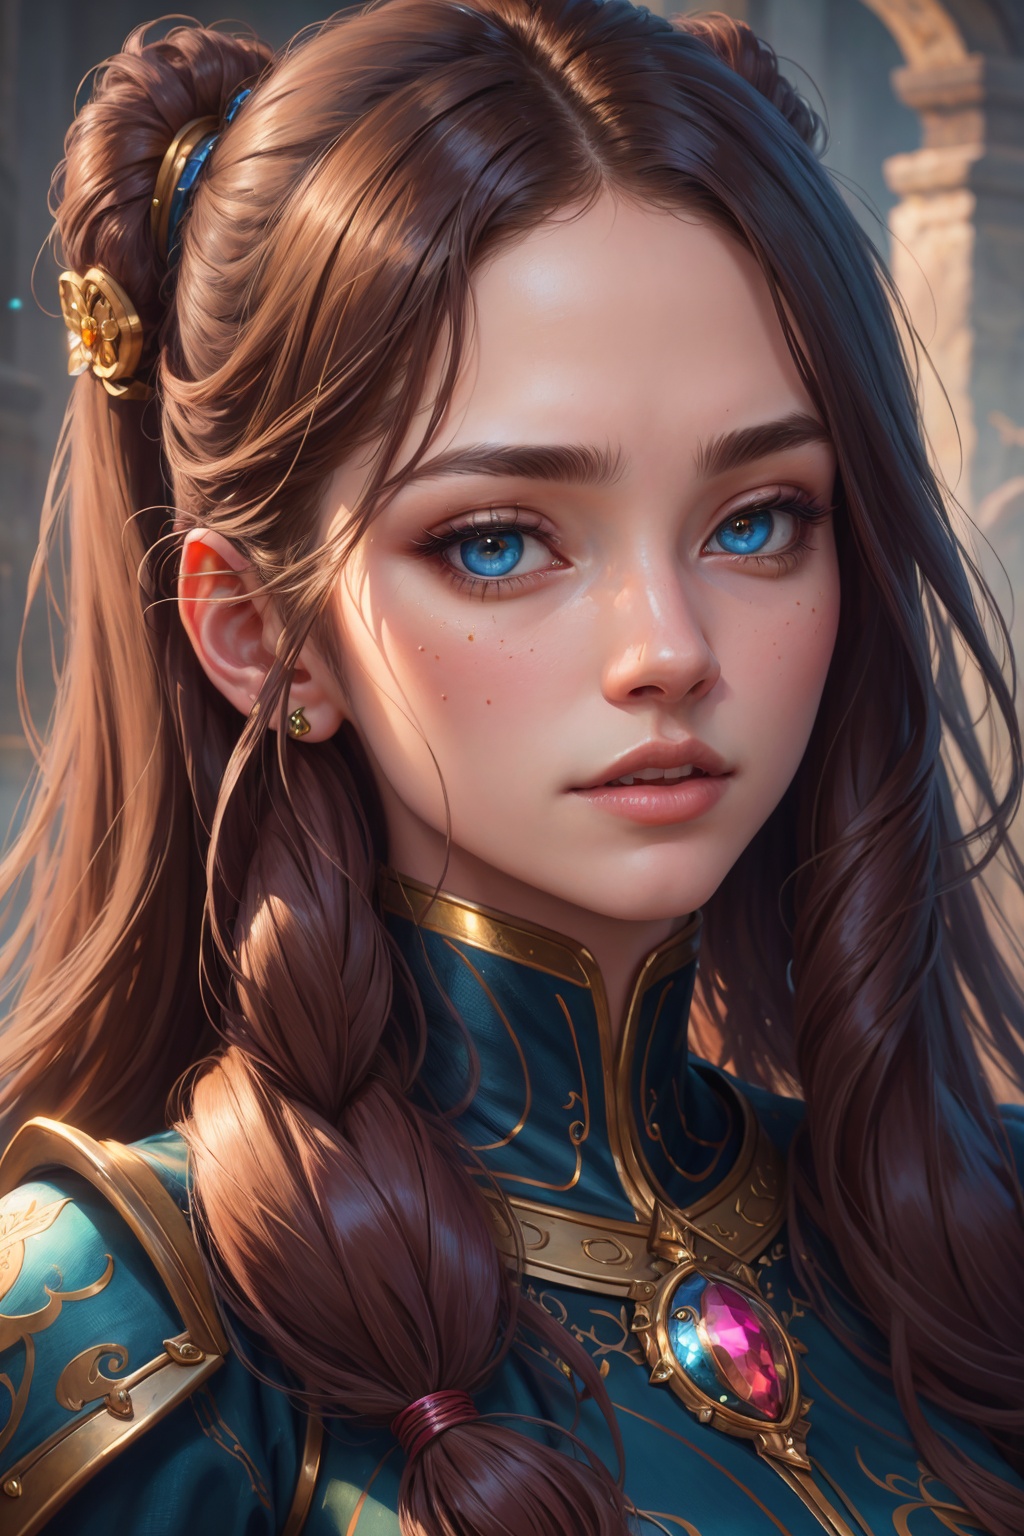 ((best quality)), ((masterpiece)), (detailed), close-up person, long hair, (fantasy art:1.3), cute cyborg girl, highly detailed face, beautiful artwork illustration, (portrait composition:1.3), (8k resolution:1.2), (rating_explicit), (score_9, score_8_up, score_7_up, score_6_up, score_5_up, score_4_up, high res, 4k)